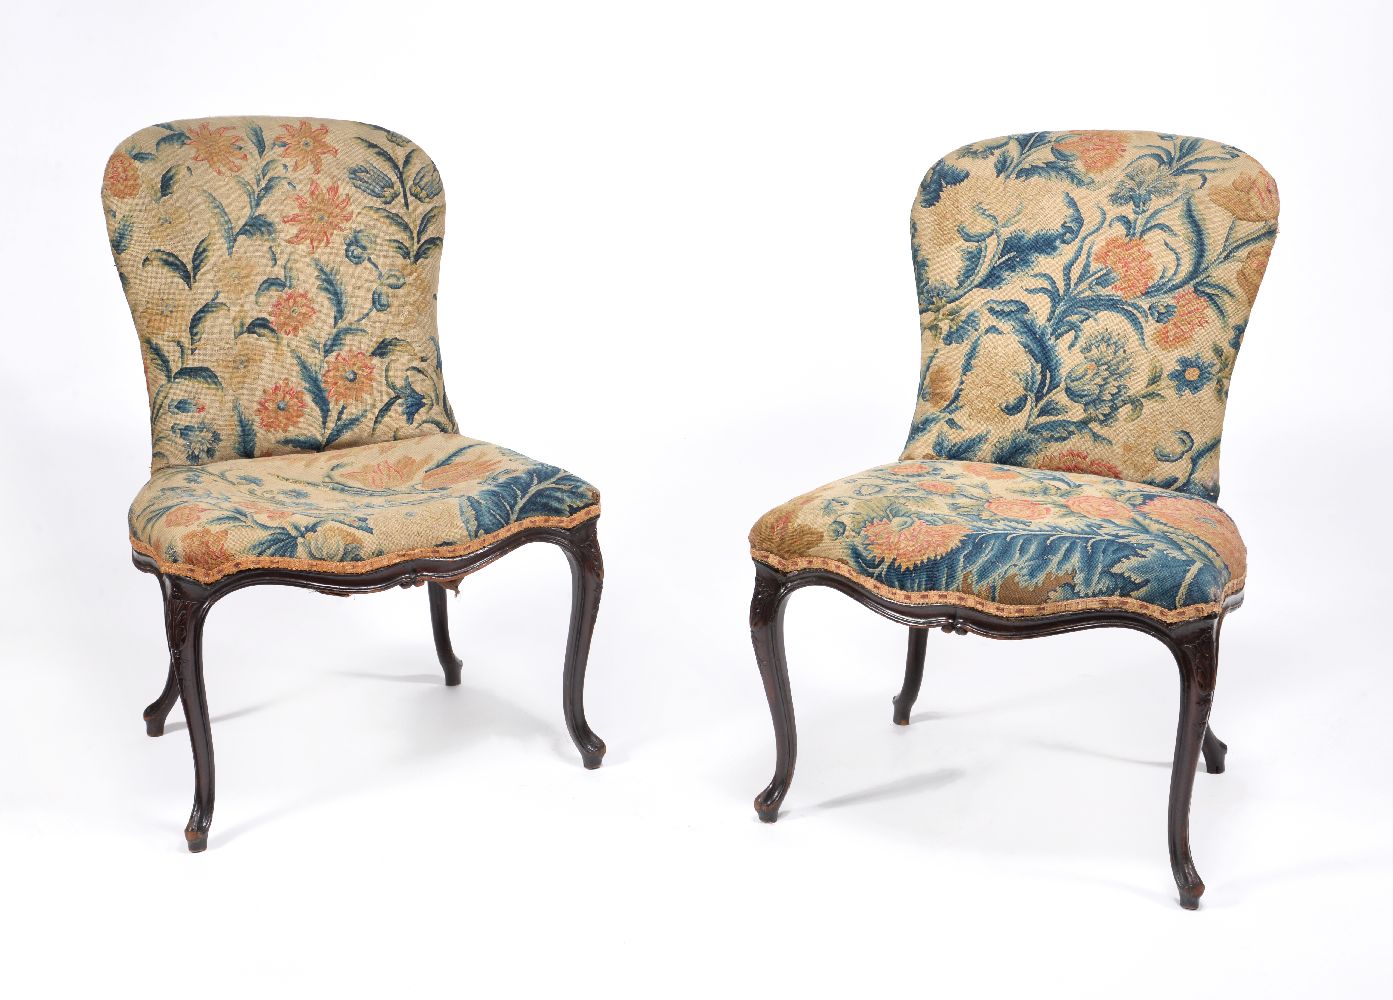 A pair of George III mahogany and needlework upholstered side chairs